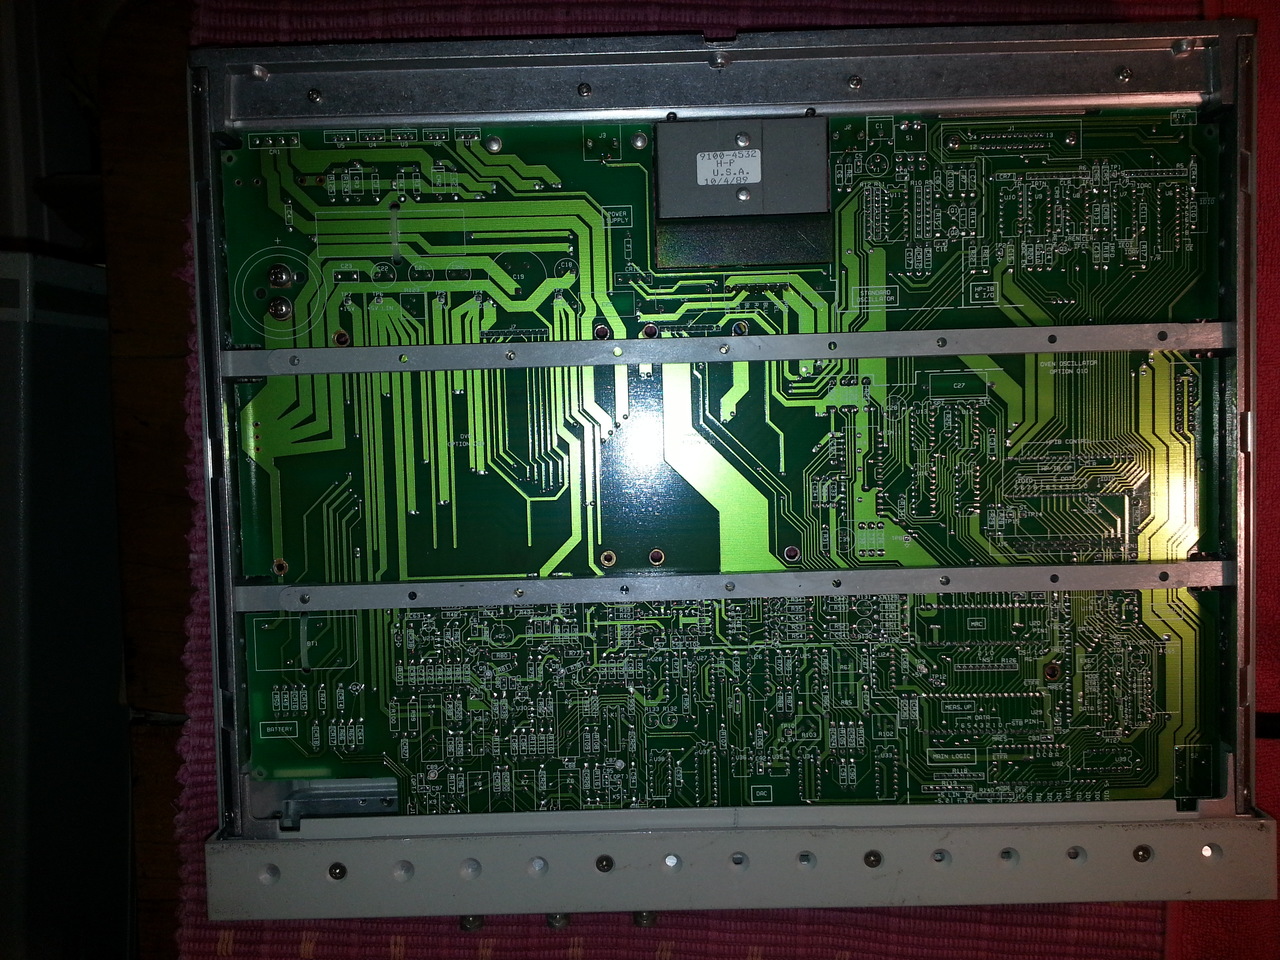 The bottom view of the PCB.